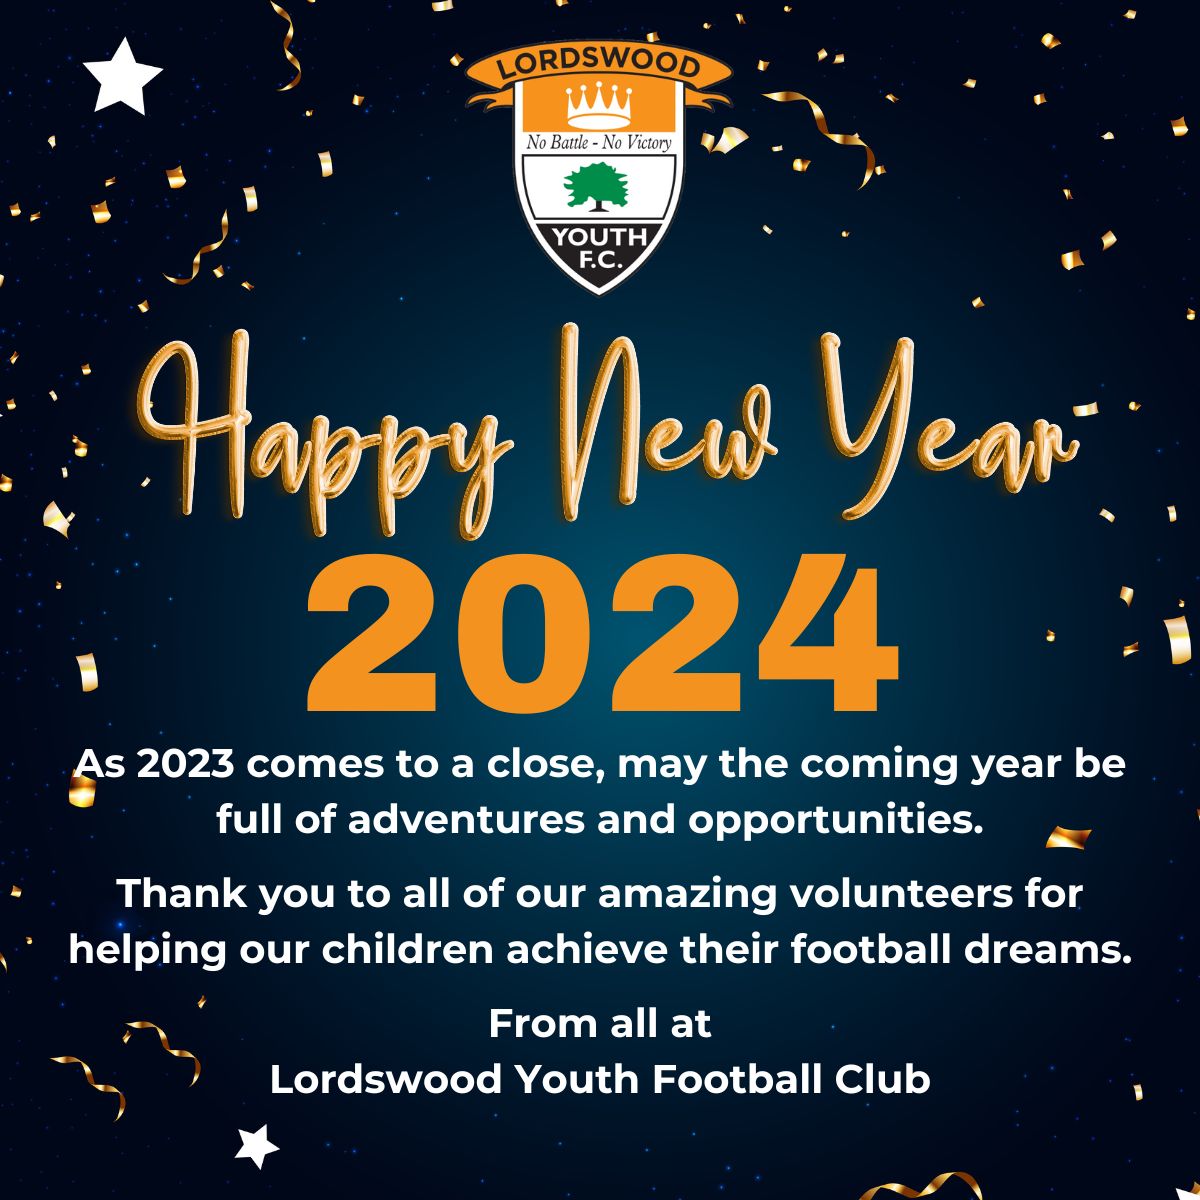 Lordswood Youth Football Club (@lordswood_youth) on Twitter photo 2023-12-31 11:30:21